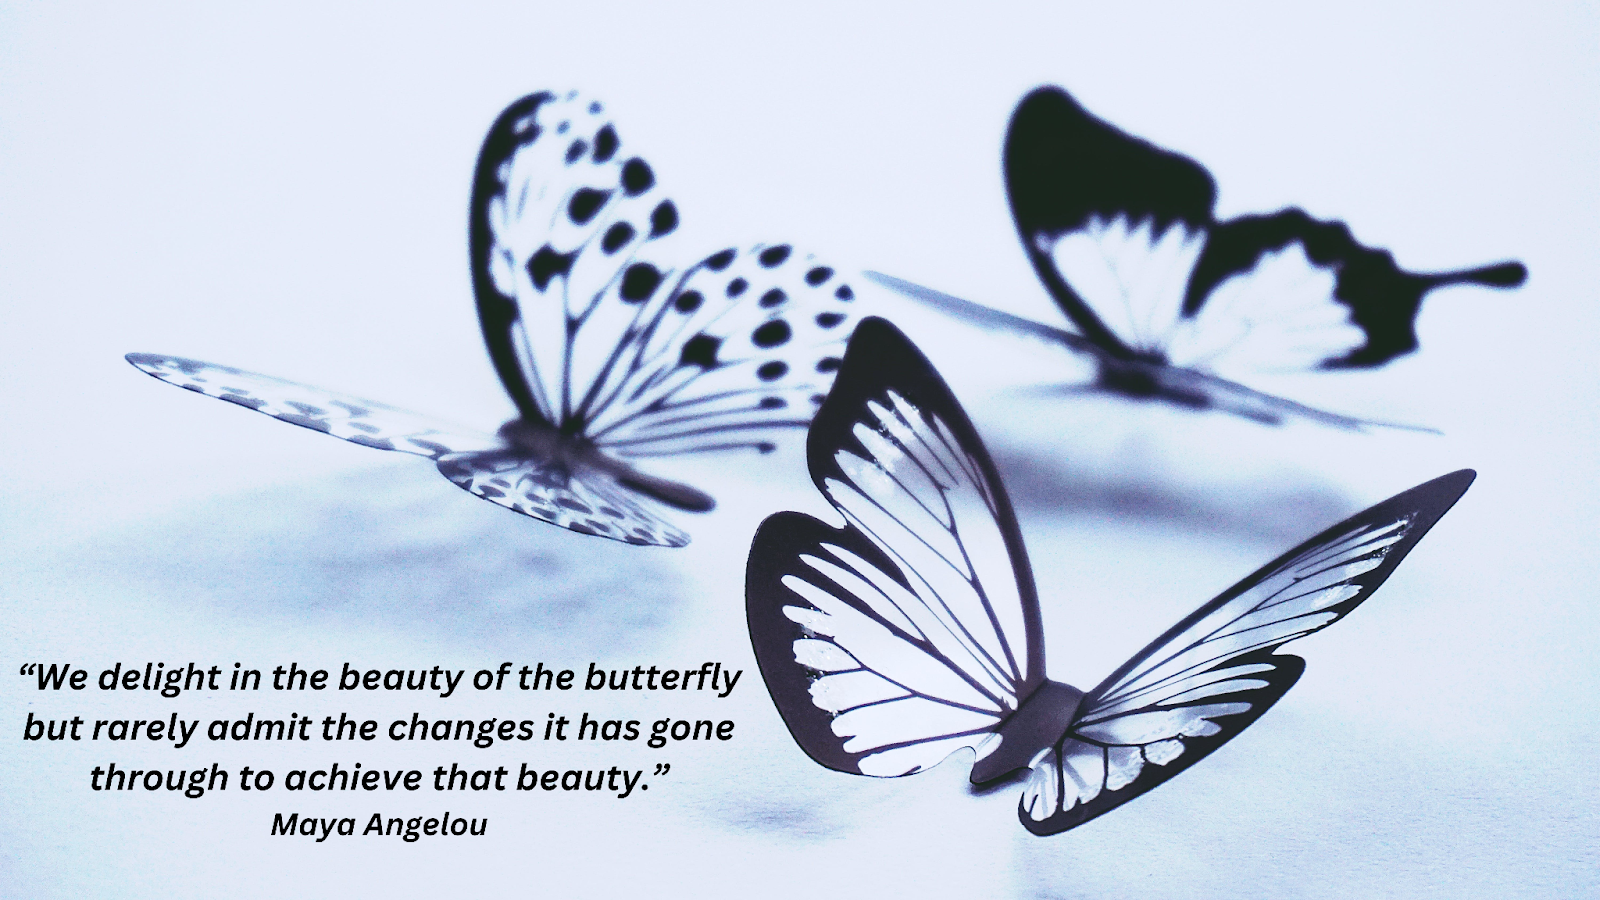 Butterfly Quotes for Instagram